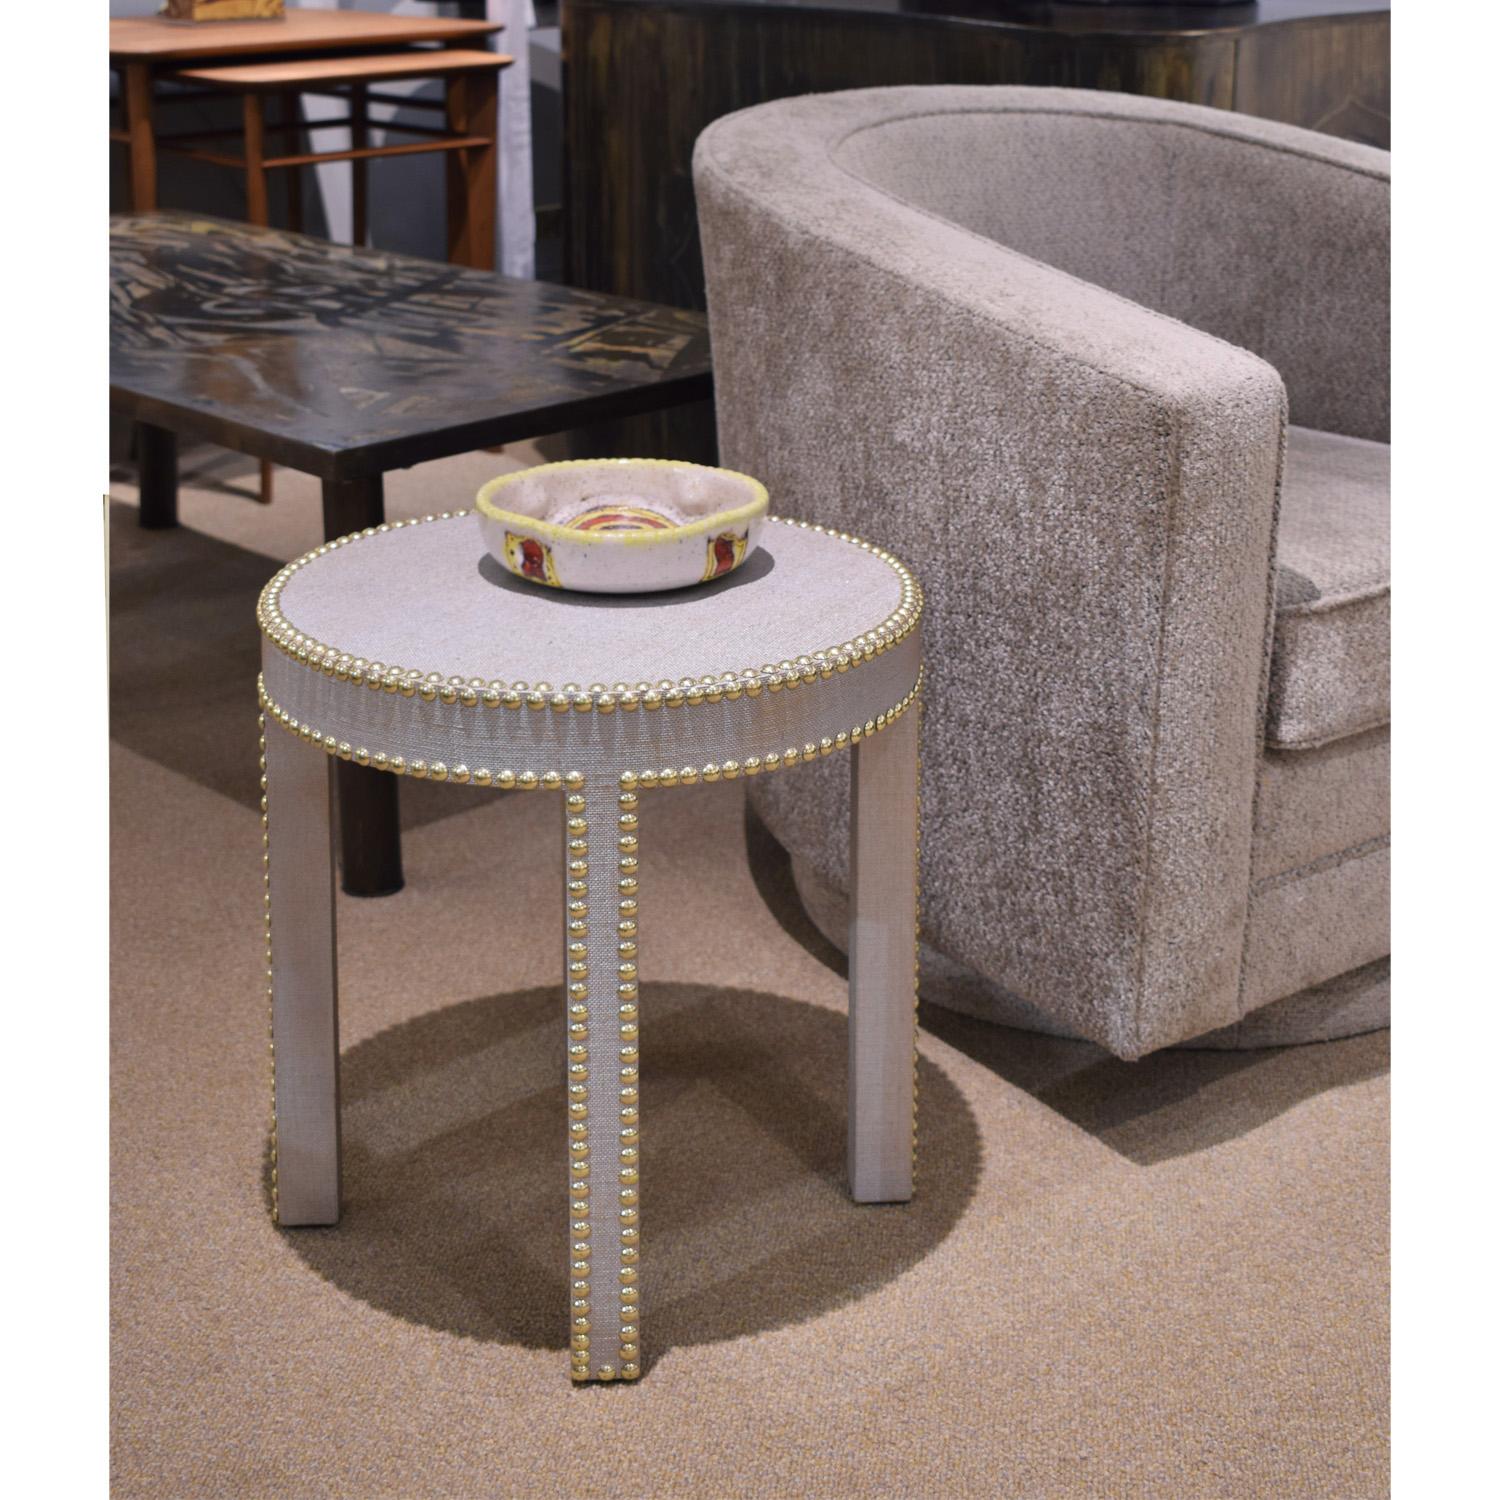 Modern Lobel Originals Side Table in Platinum Lacquered Linen and Brass Studs 'New' For Sale